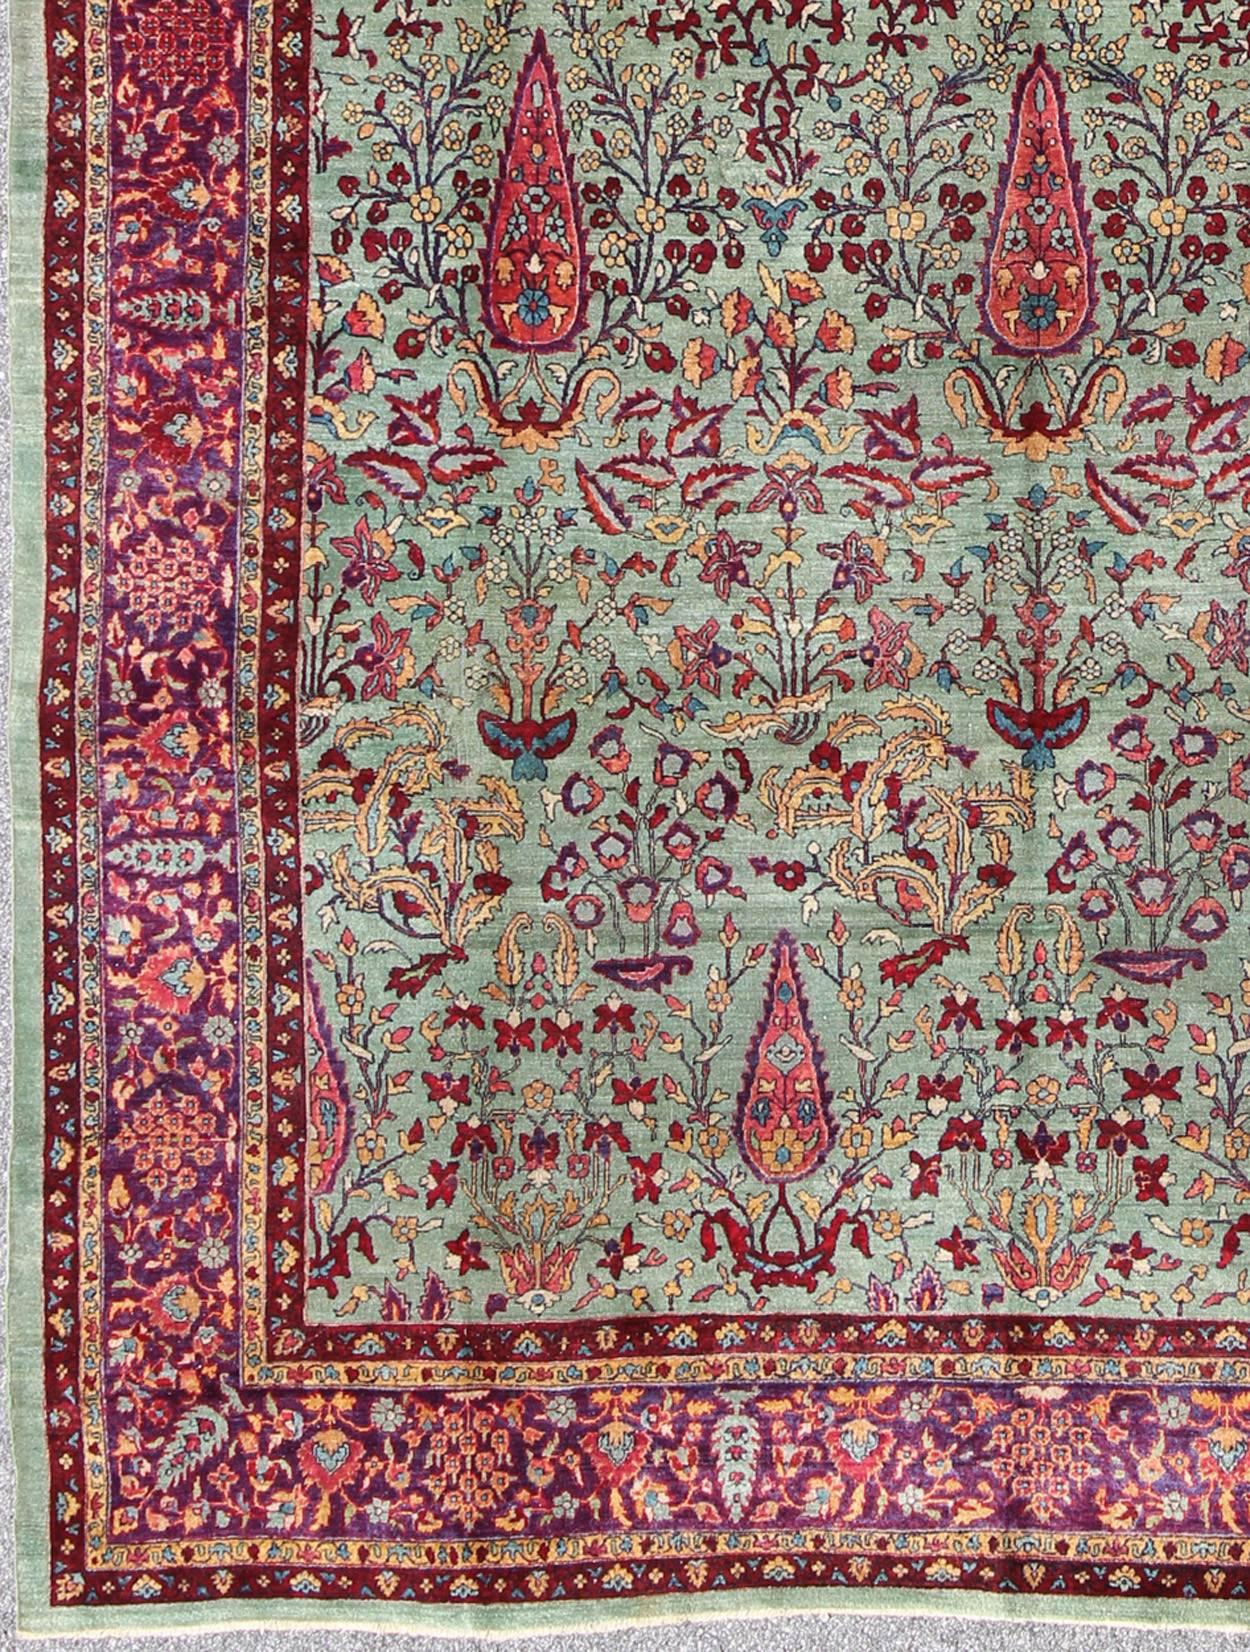 Antique Agra rug with branching floral design in mint green and Burgundy, rug CIND-8061, country of origin / type: India / Agra, circa 1900

This magnificent vintage Agra carpet (circa 1900) is impressive in its large-scale, all-over design. The